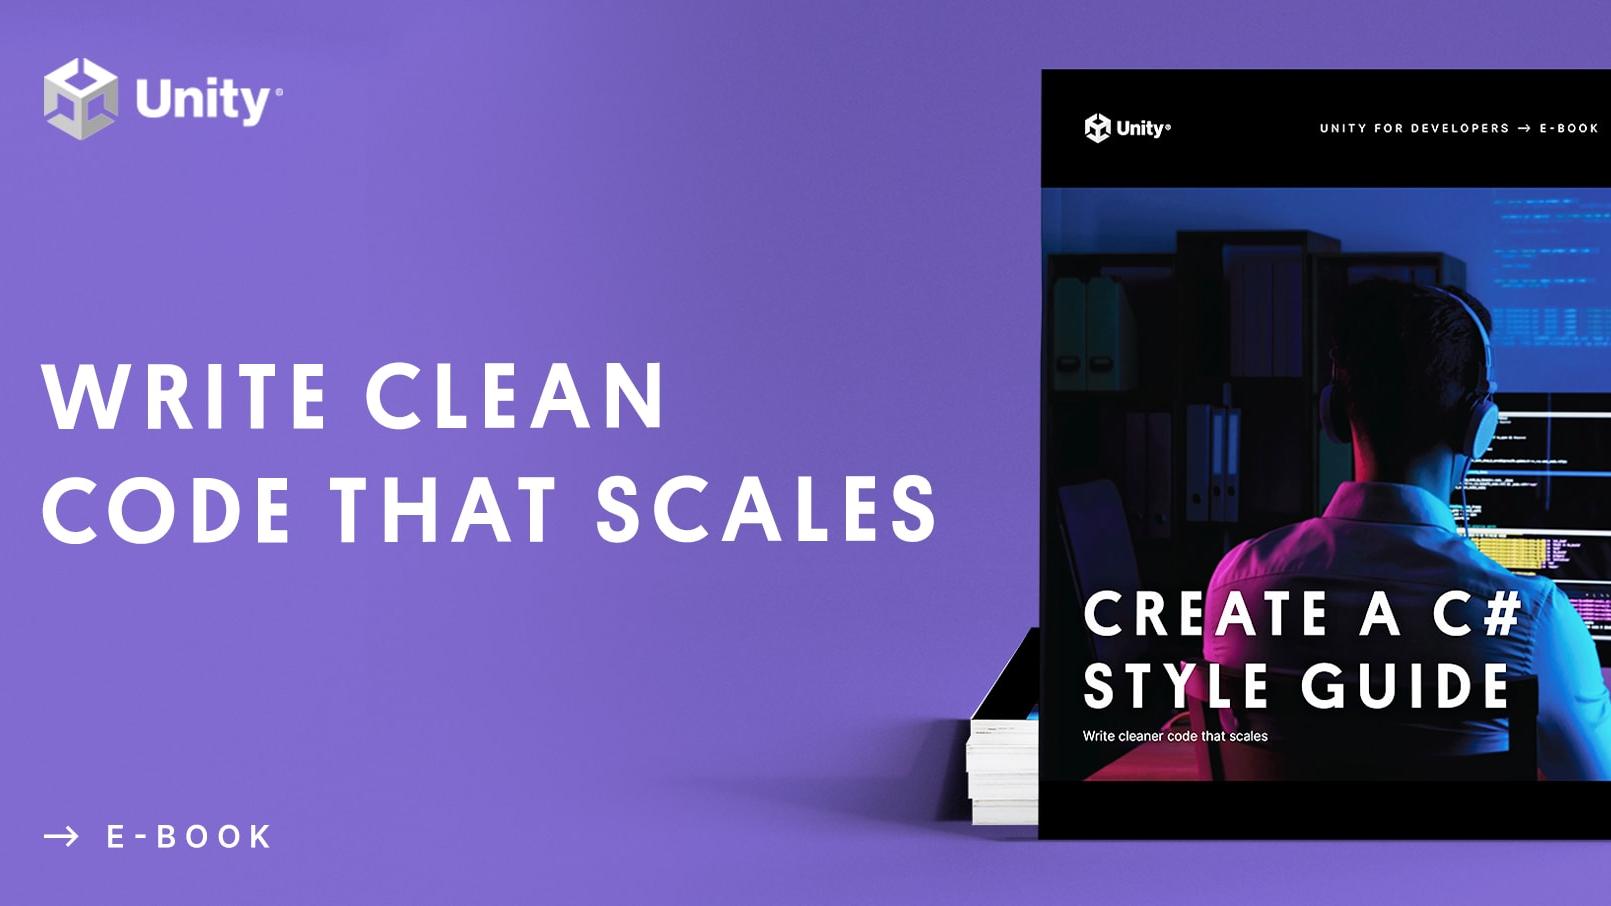 Create a C# style guide: Write cleaner code that scales e-book